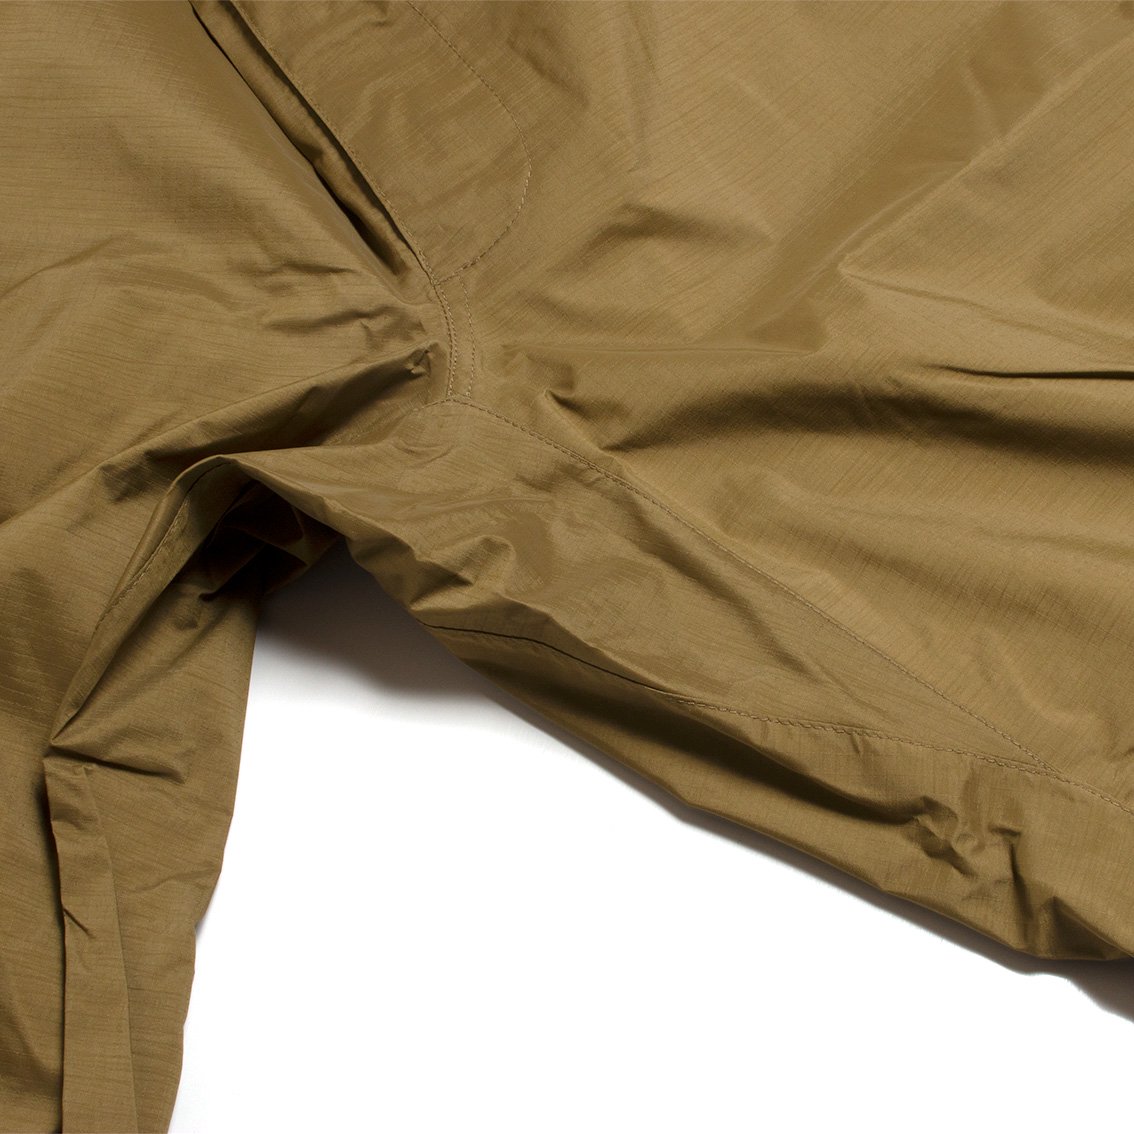 BEYOND CLOTHING / ビヨンドクロージング]PCU L6 GORE-TEX PANT 